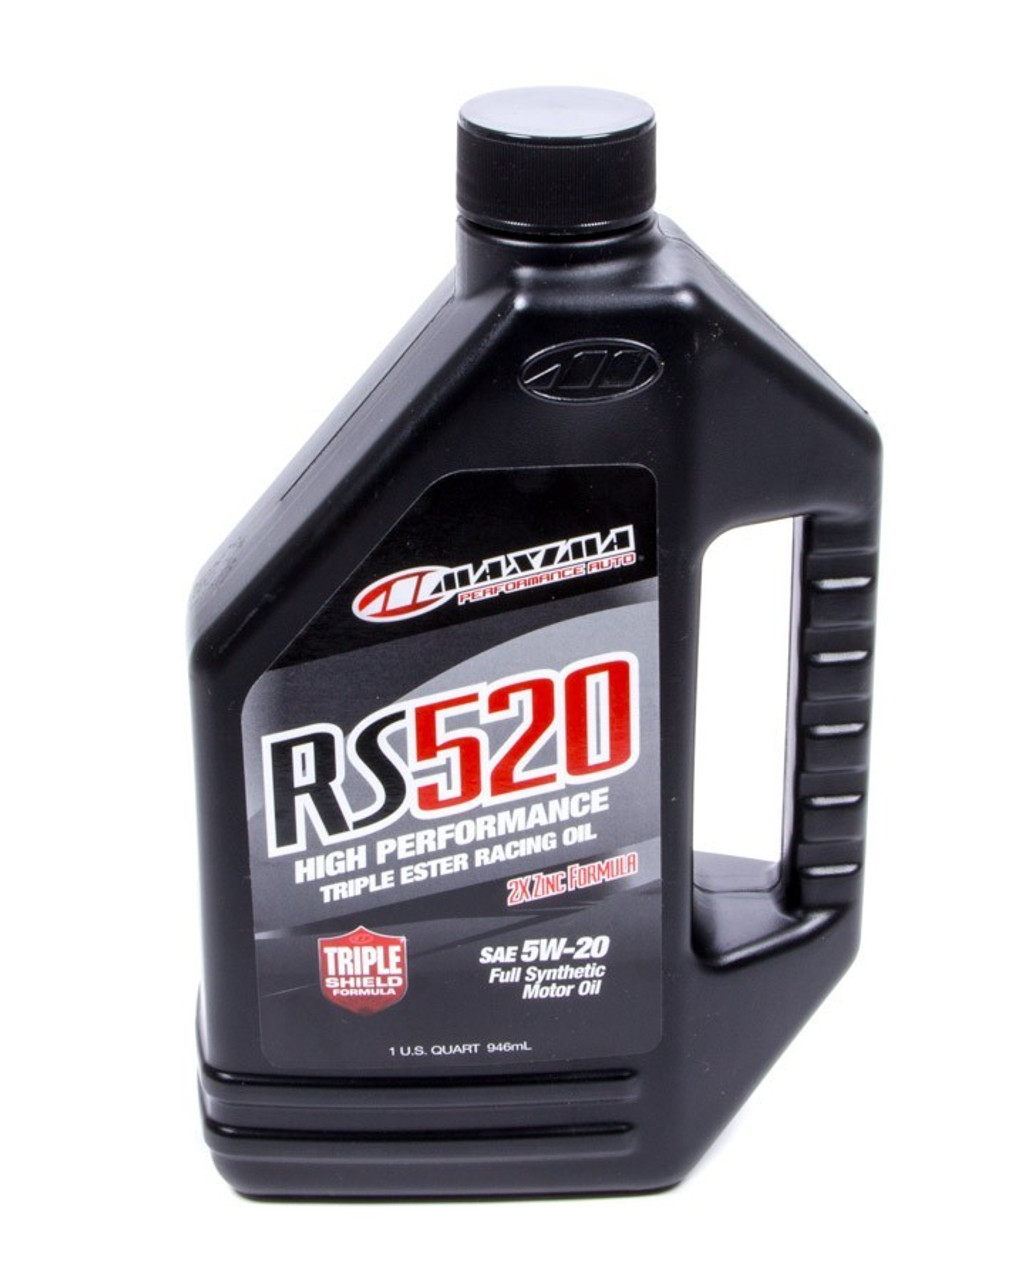 5w20 Synthetic Oil 1 Quart RS520